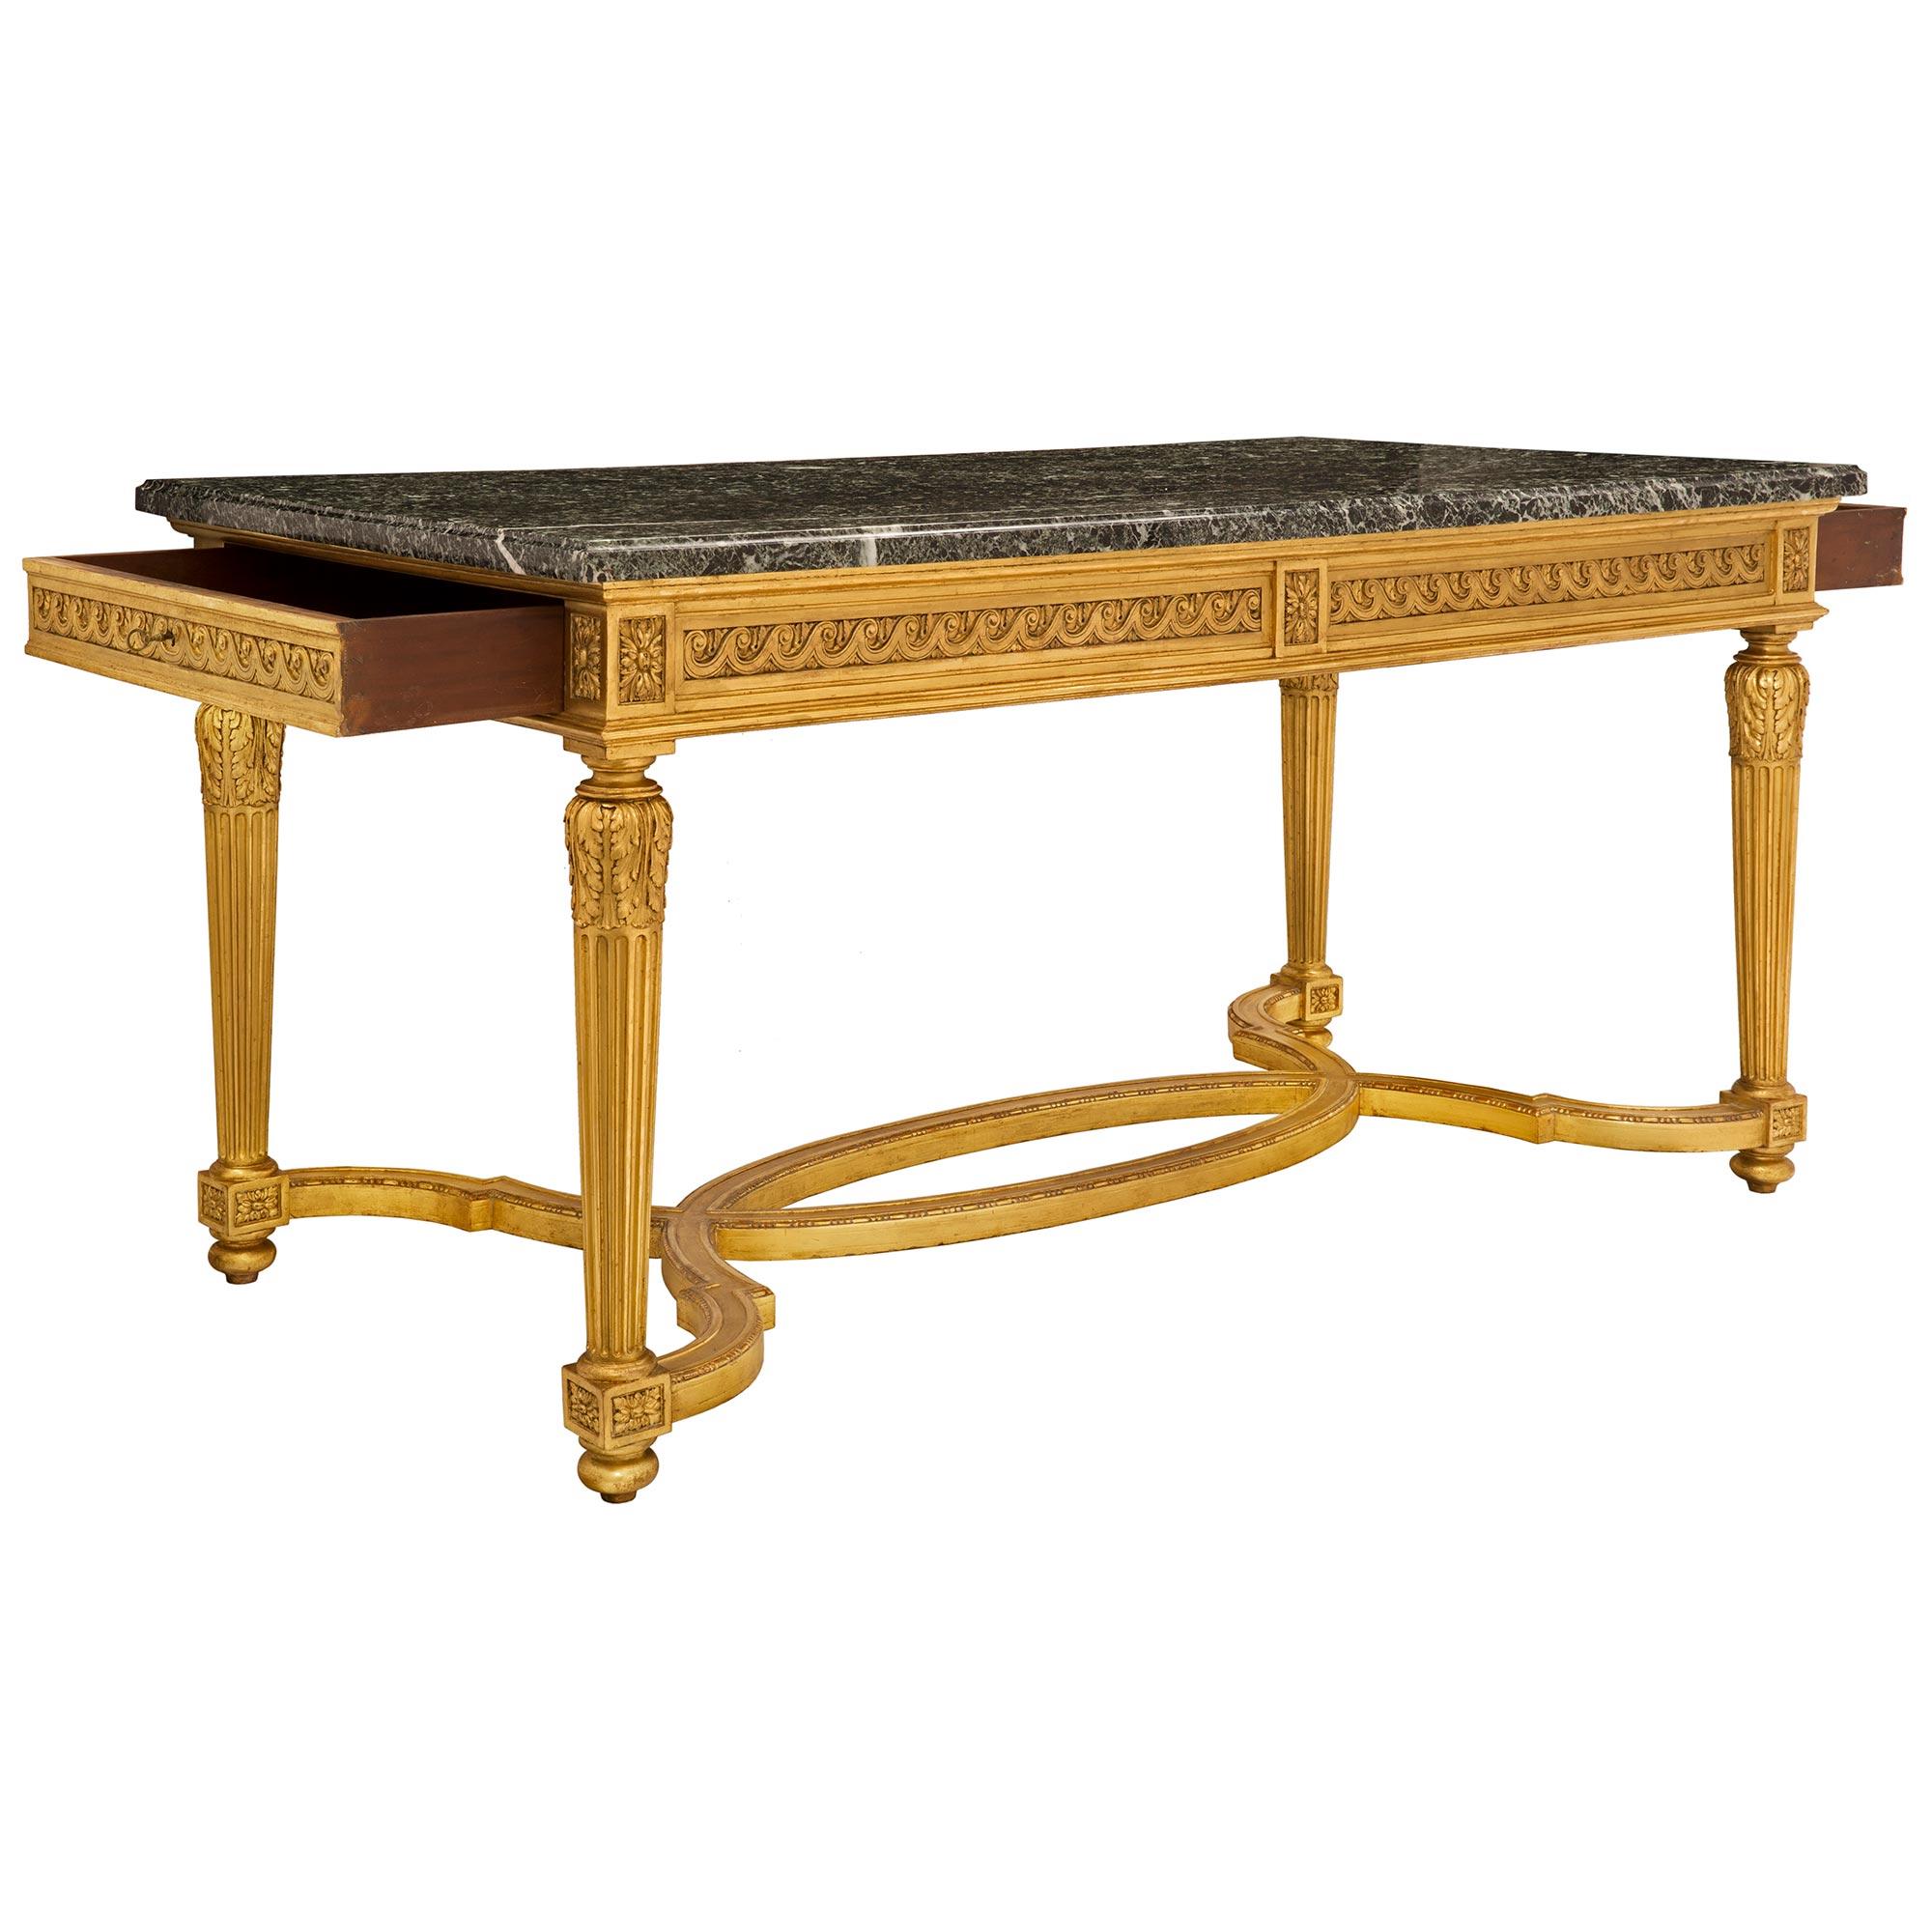 19th Century Louis XVI Style Giltwood and Vert Antique Marble Center Table For Sale 1